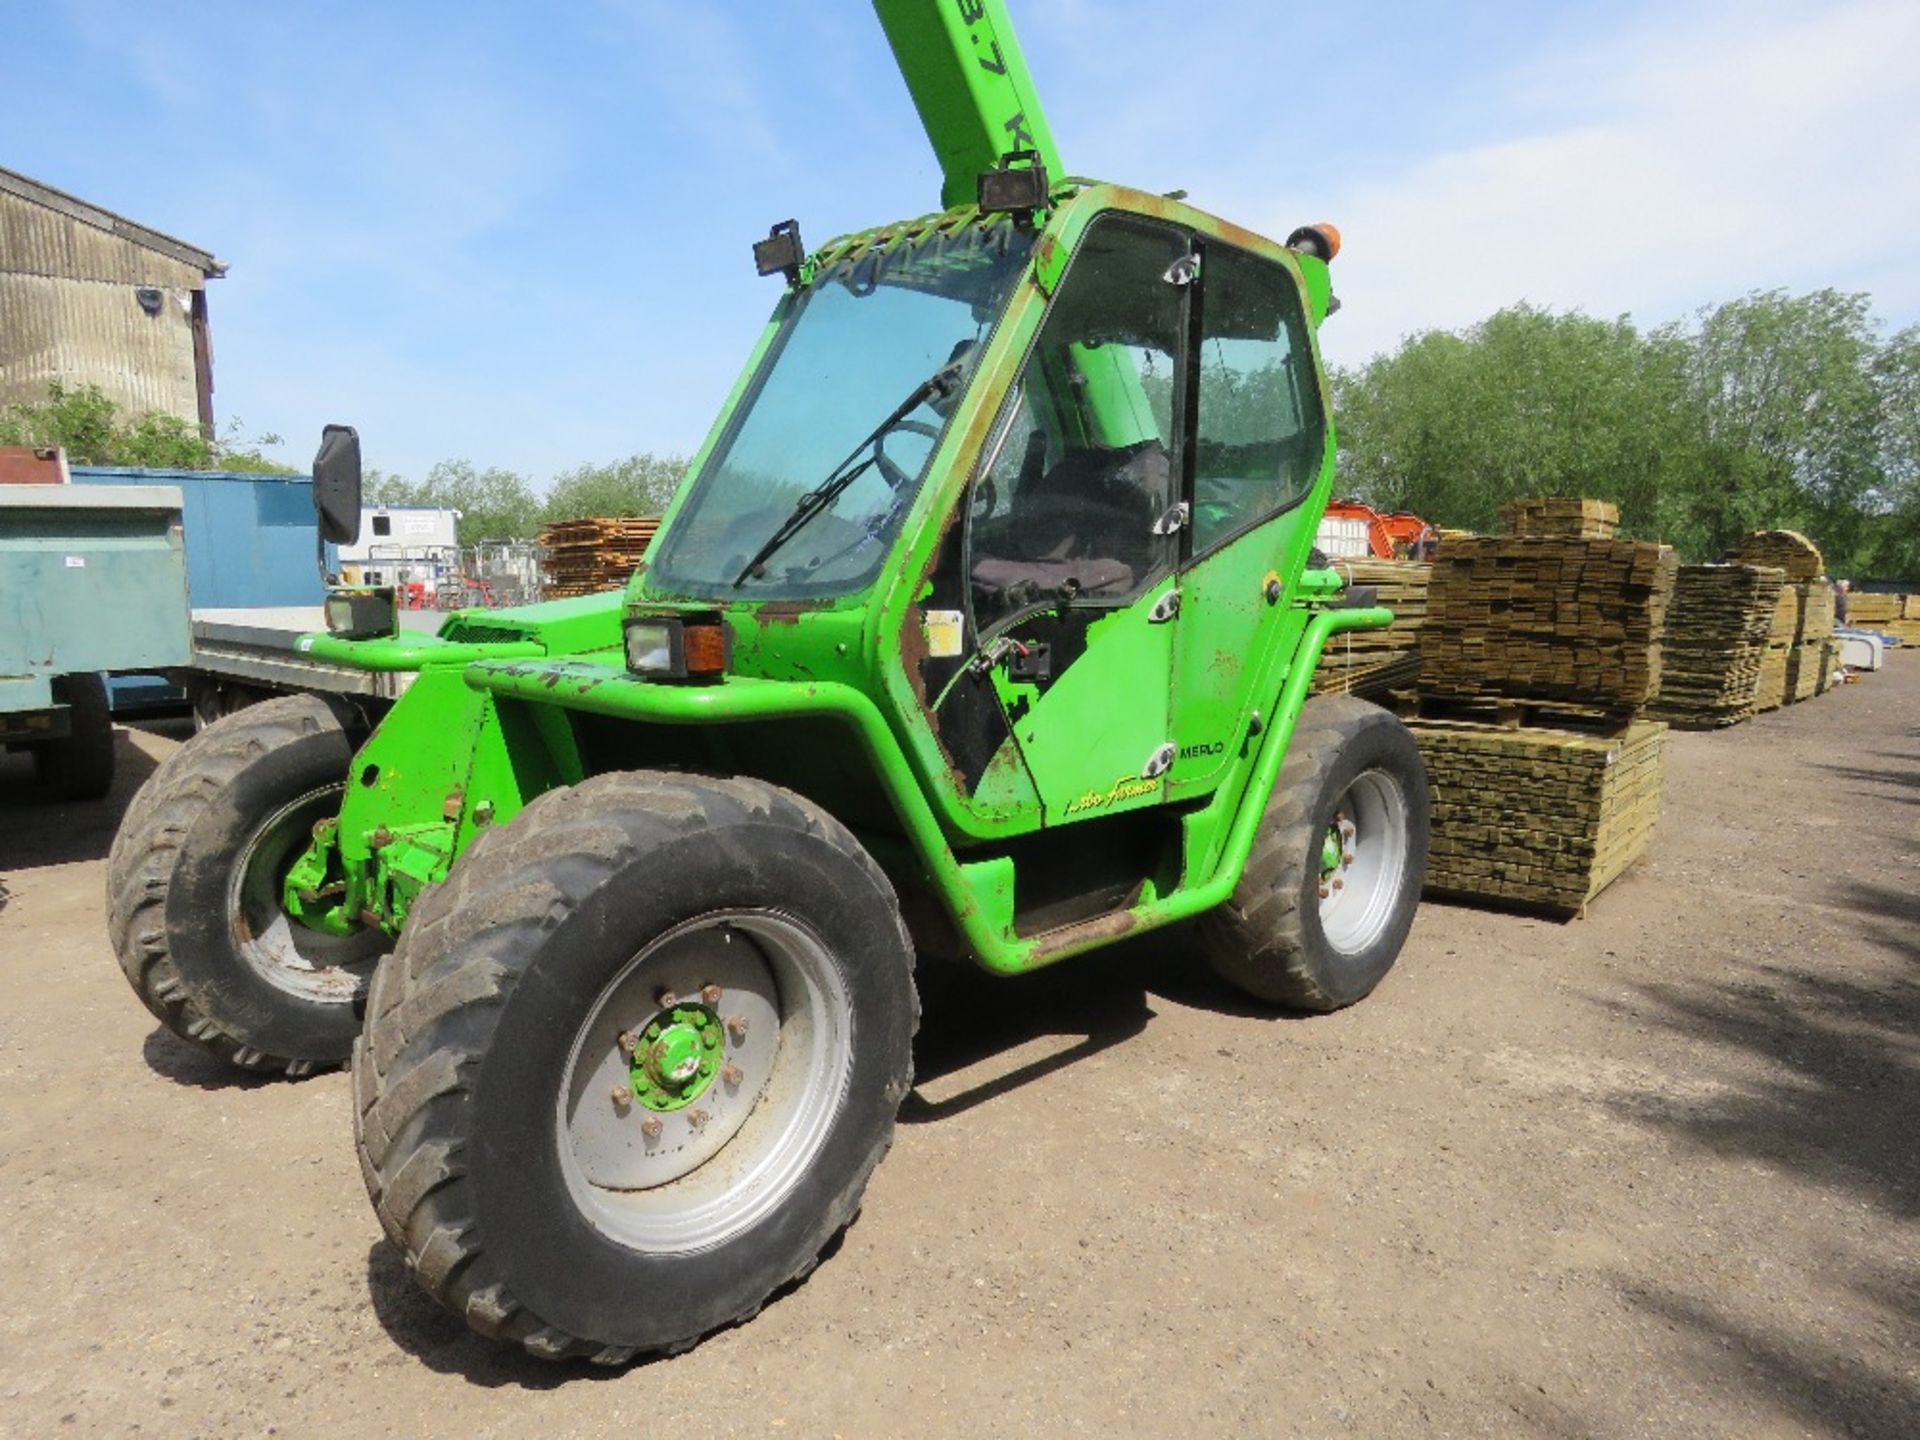 MERLO PANORAMIC P28.7 AGRI SPEC TELESCOPIC HANDLER, YEAR 2004 BUILD. 9764 REC HOURS. WHEN TESTED WAS - Image 2 of 13